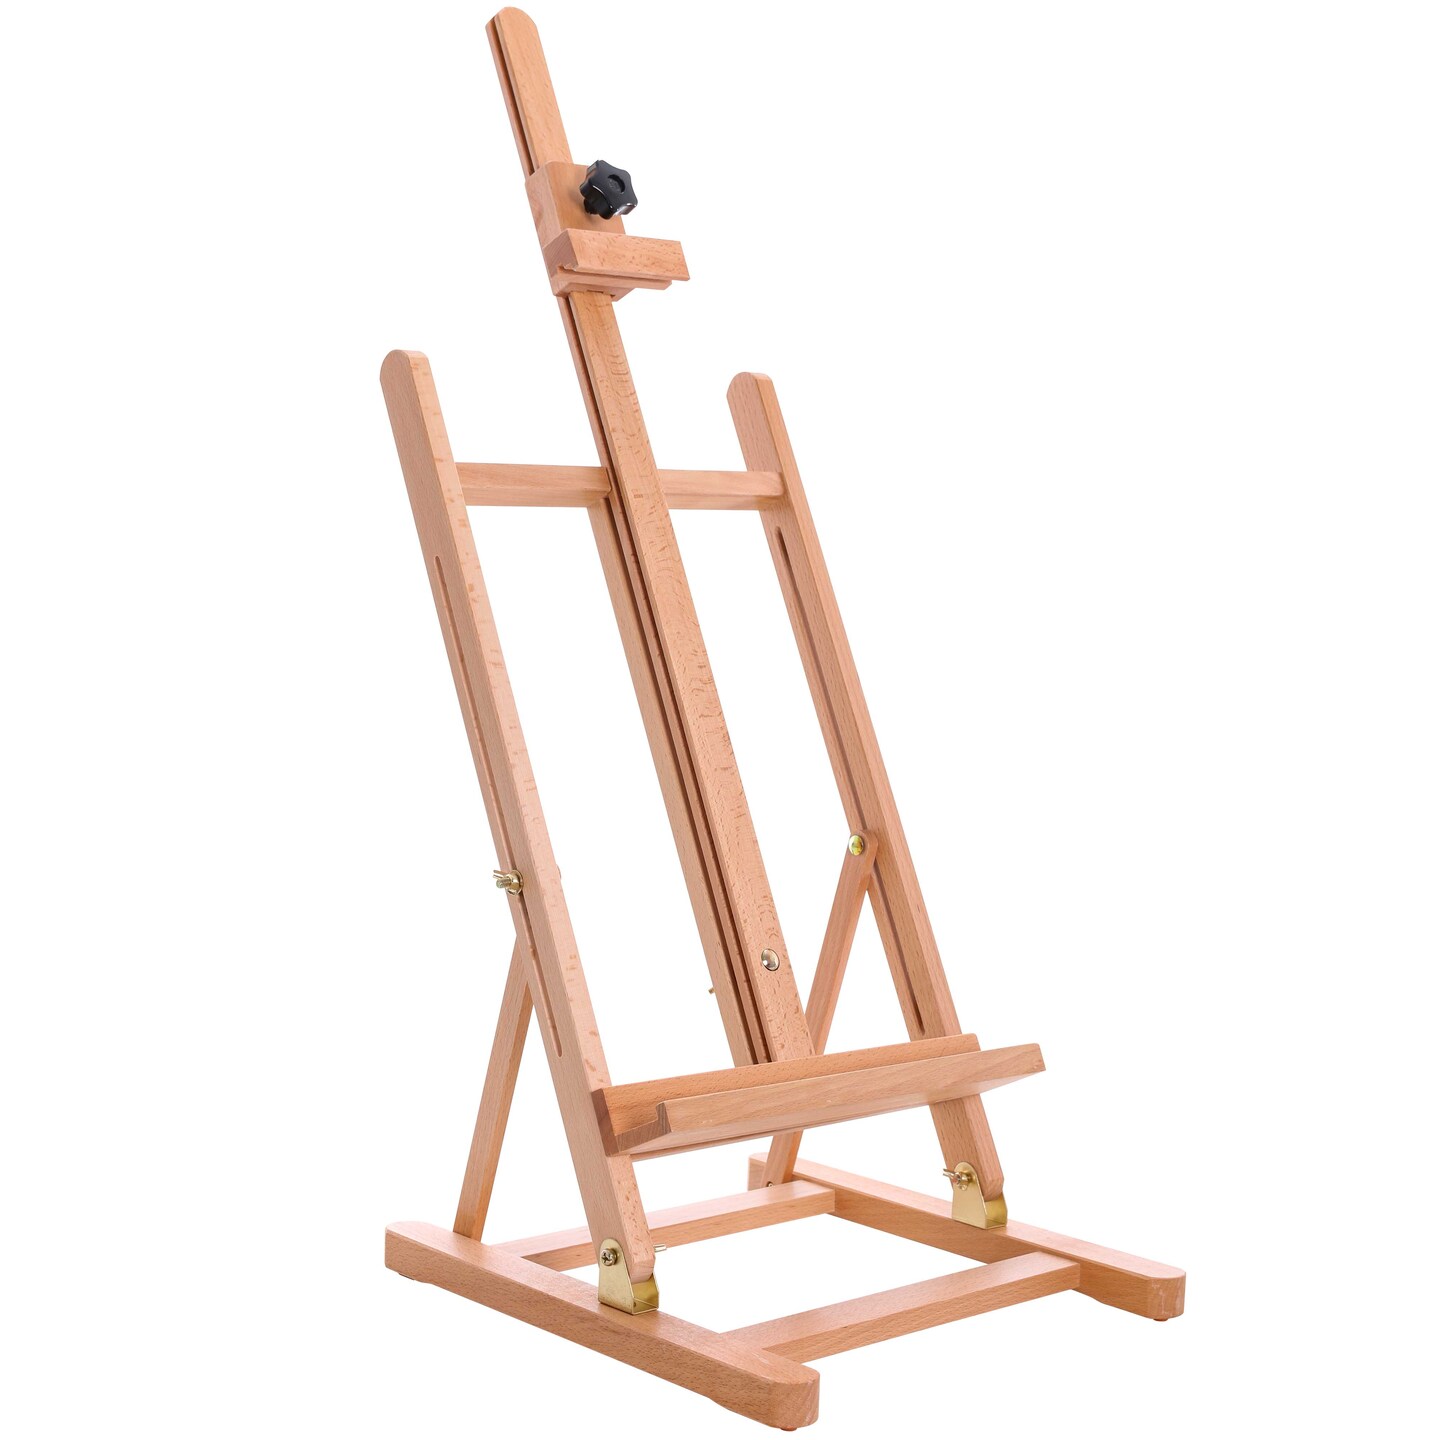 Beechwood Table Easel- Adjustable with Palette and Storage- 7 Elements